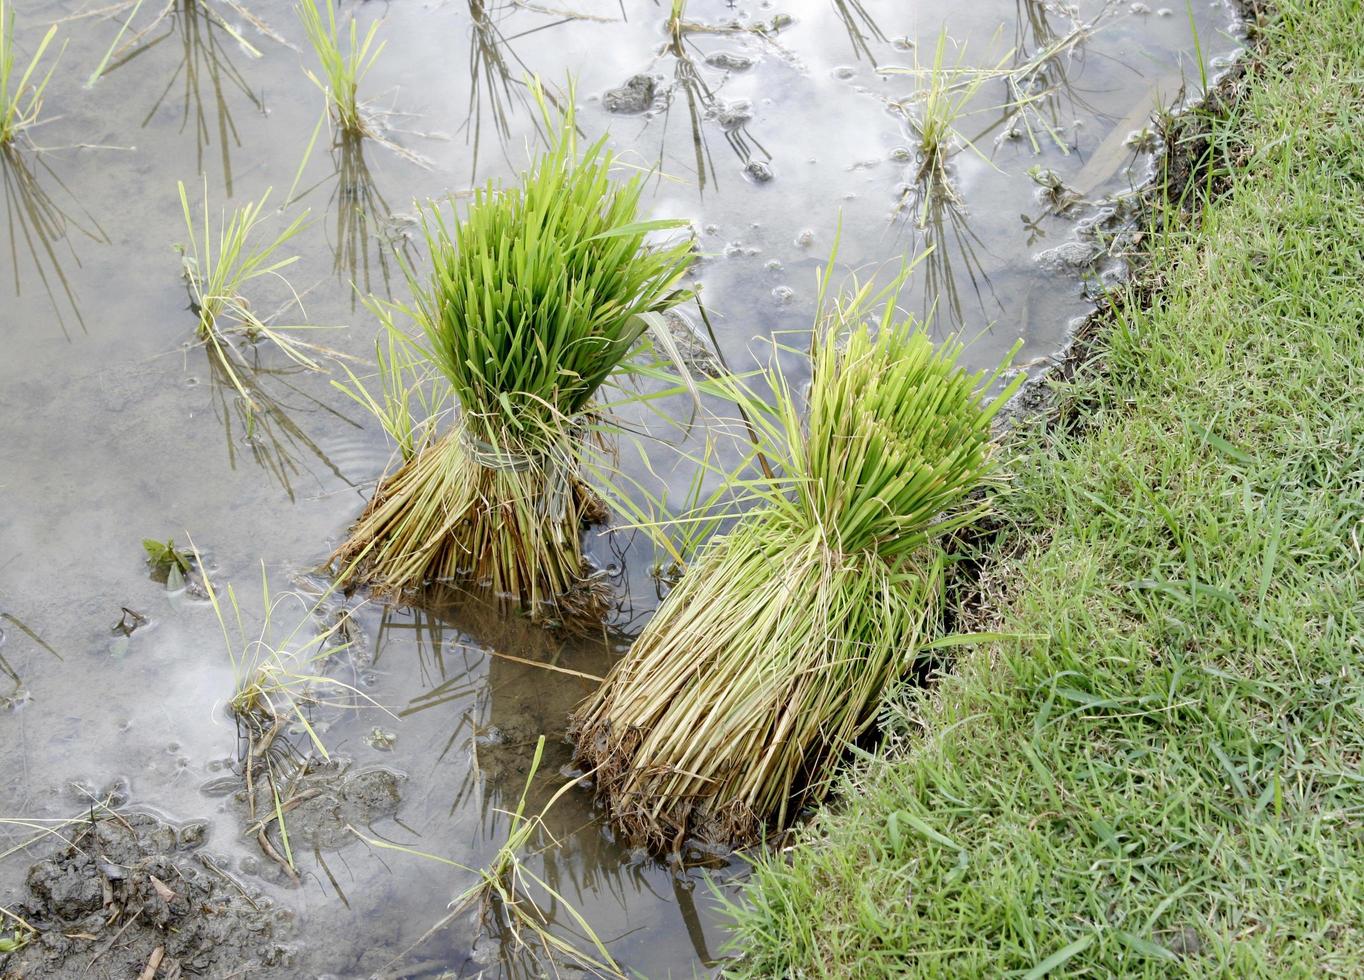 Rice plants in water photo